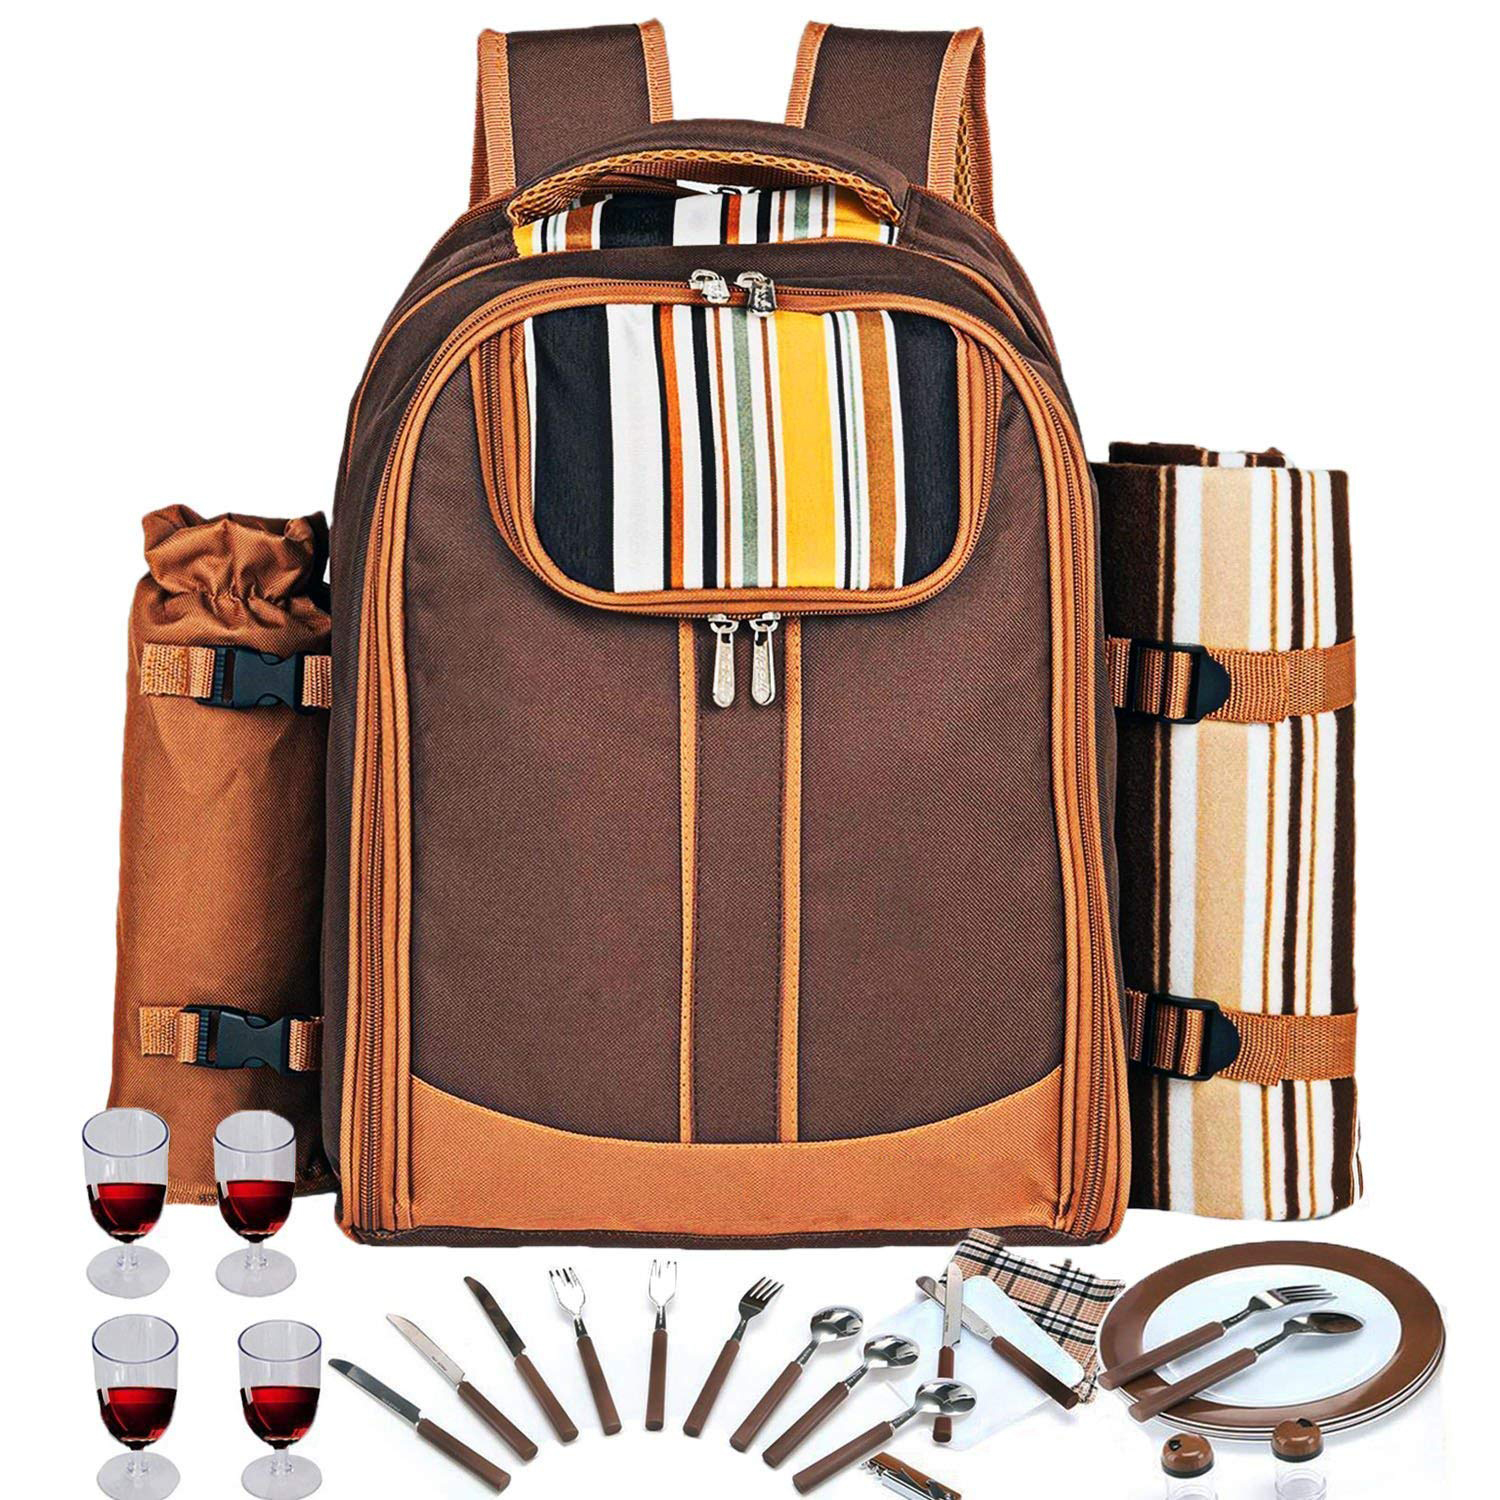 https://images.51microshop.com/1658/product/20181214/HapTim_Strong_Picnic_Backpack_for_4_Person_with_Cutlery_Set_Cooler_Compartment_Detachable_Bottle_Wine_Holder_Brown_3065__1544760037246_1.jpg